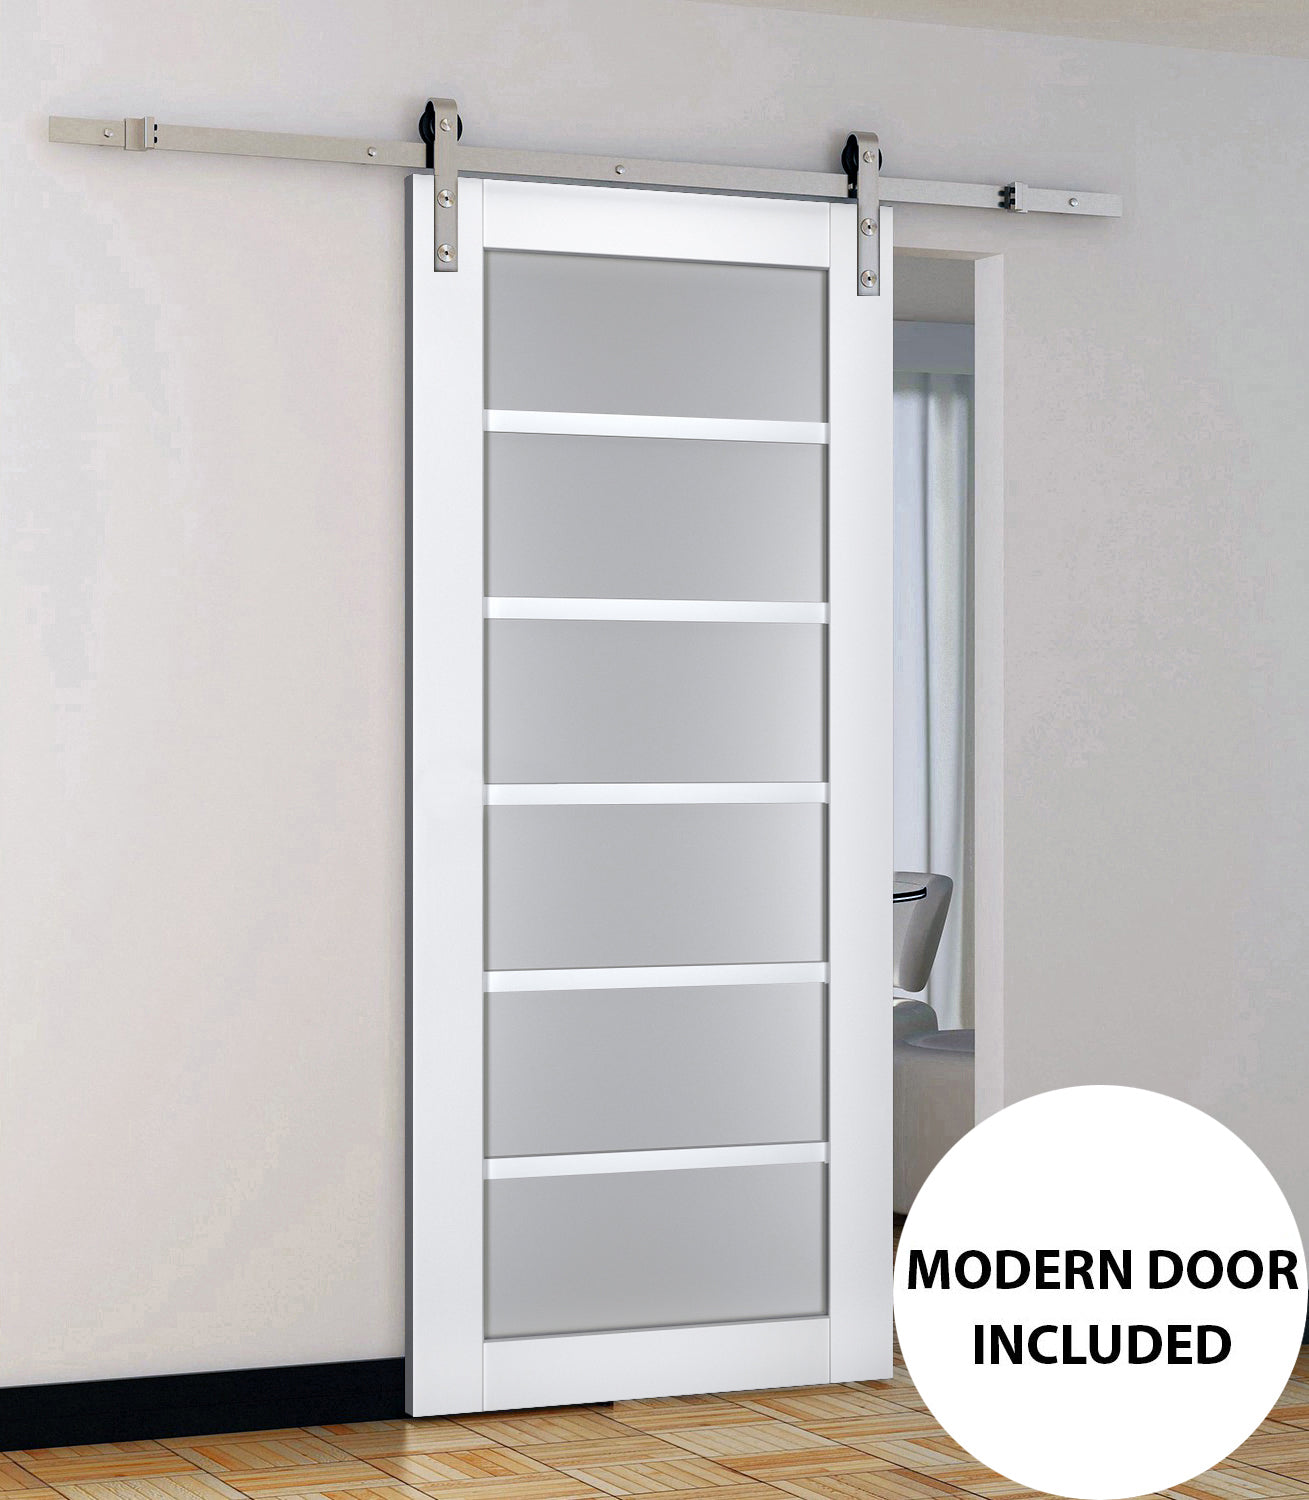 Veregio 7602 Matte White Barn Door with Frosted Glass and Silver Finish Rail